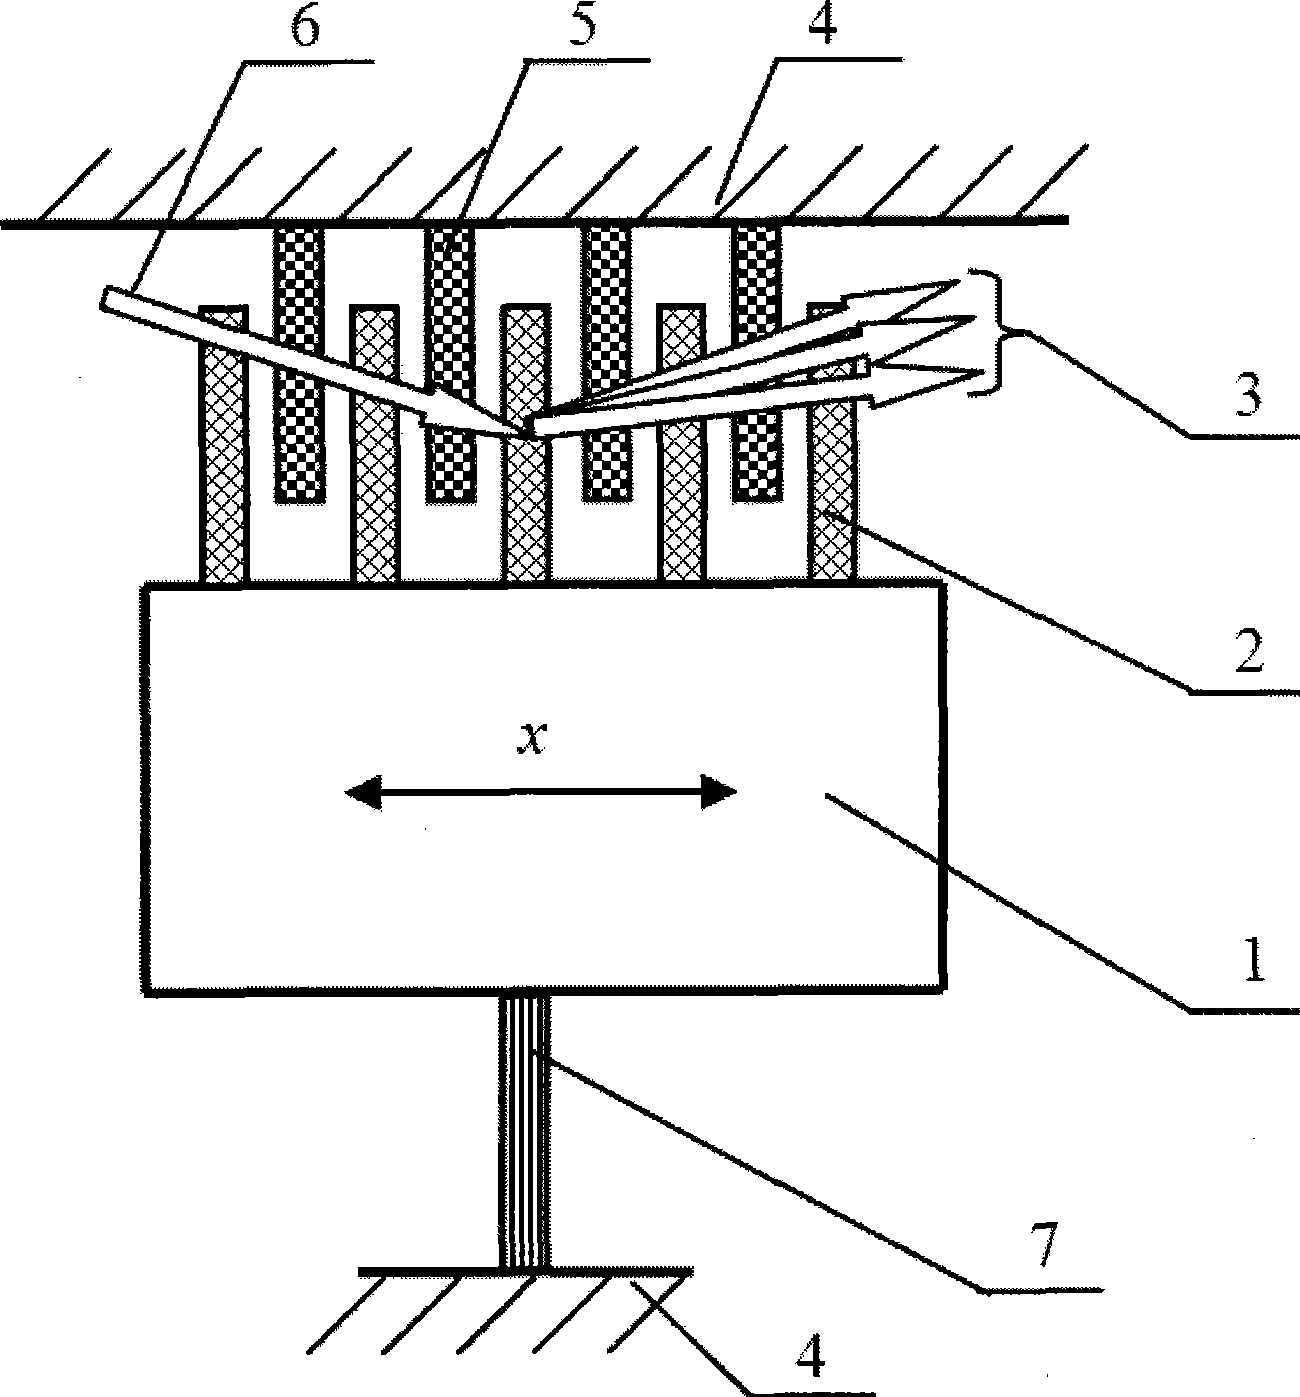 Acceleration measurement apparatus and method by using optical grating detection technology